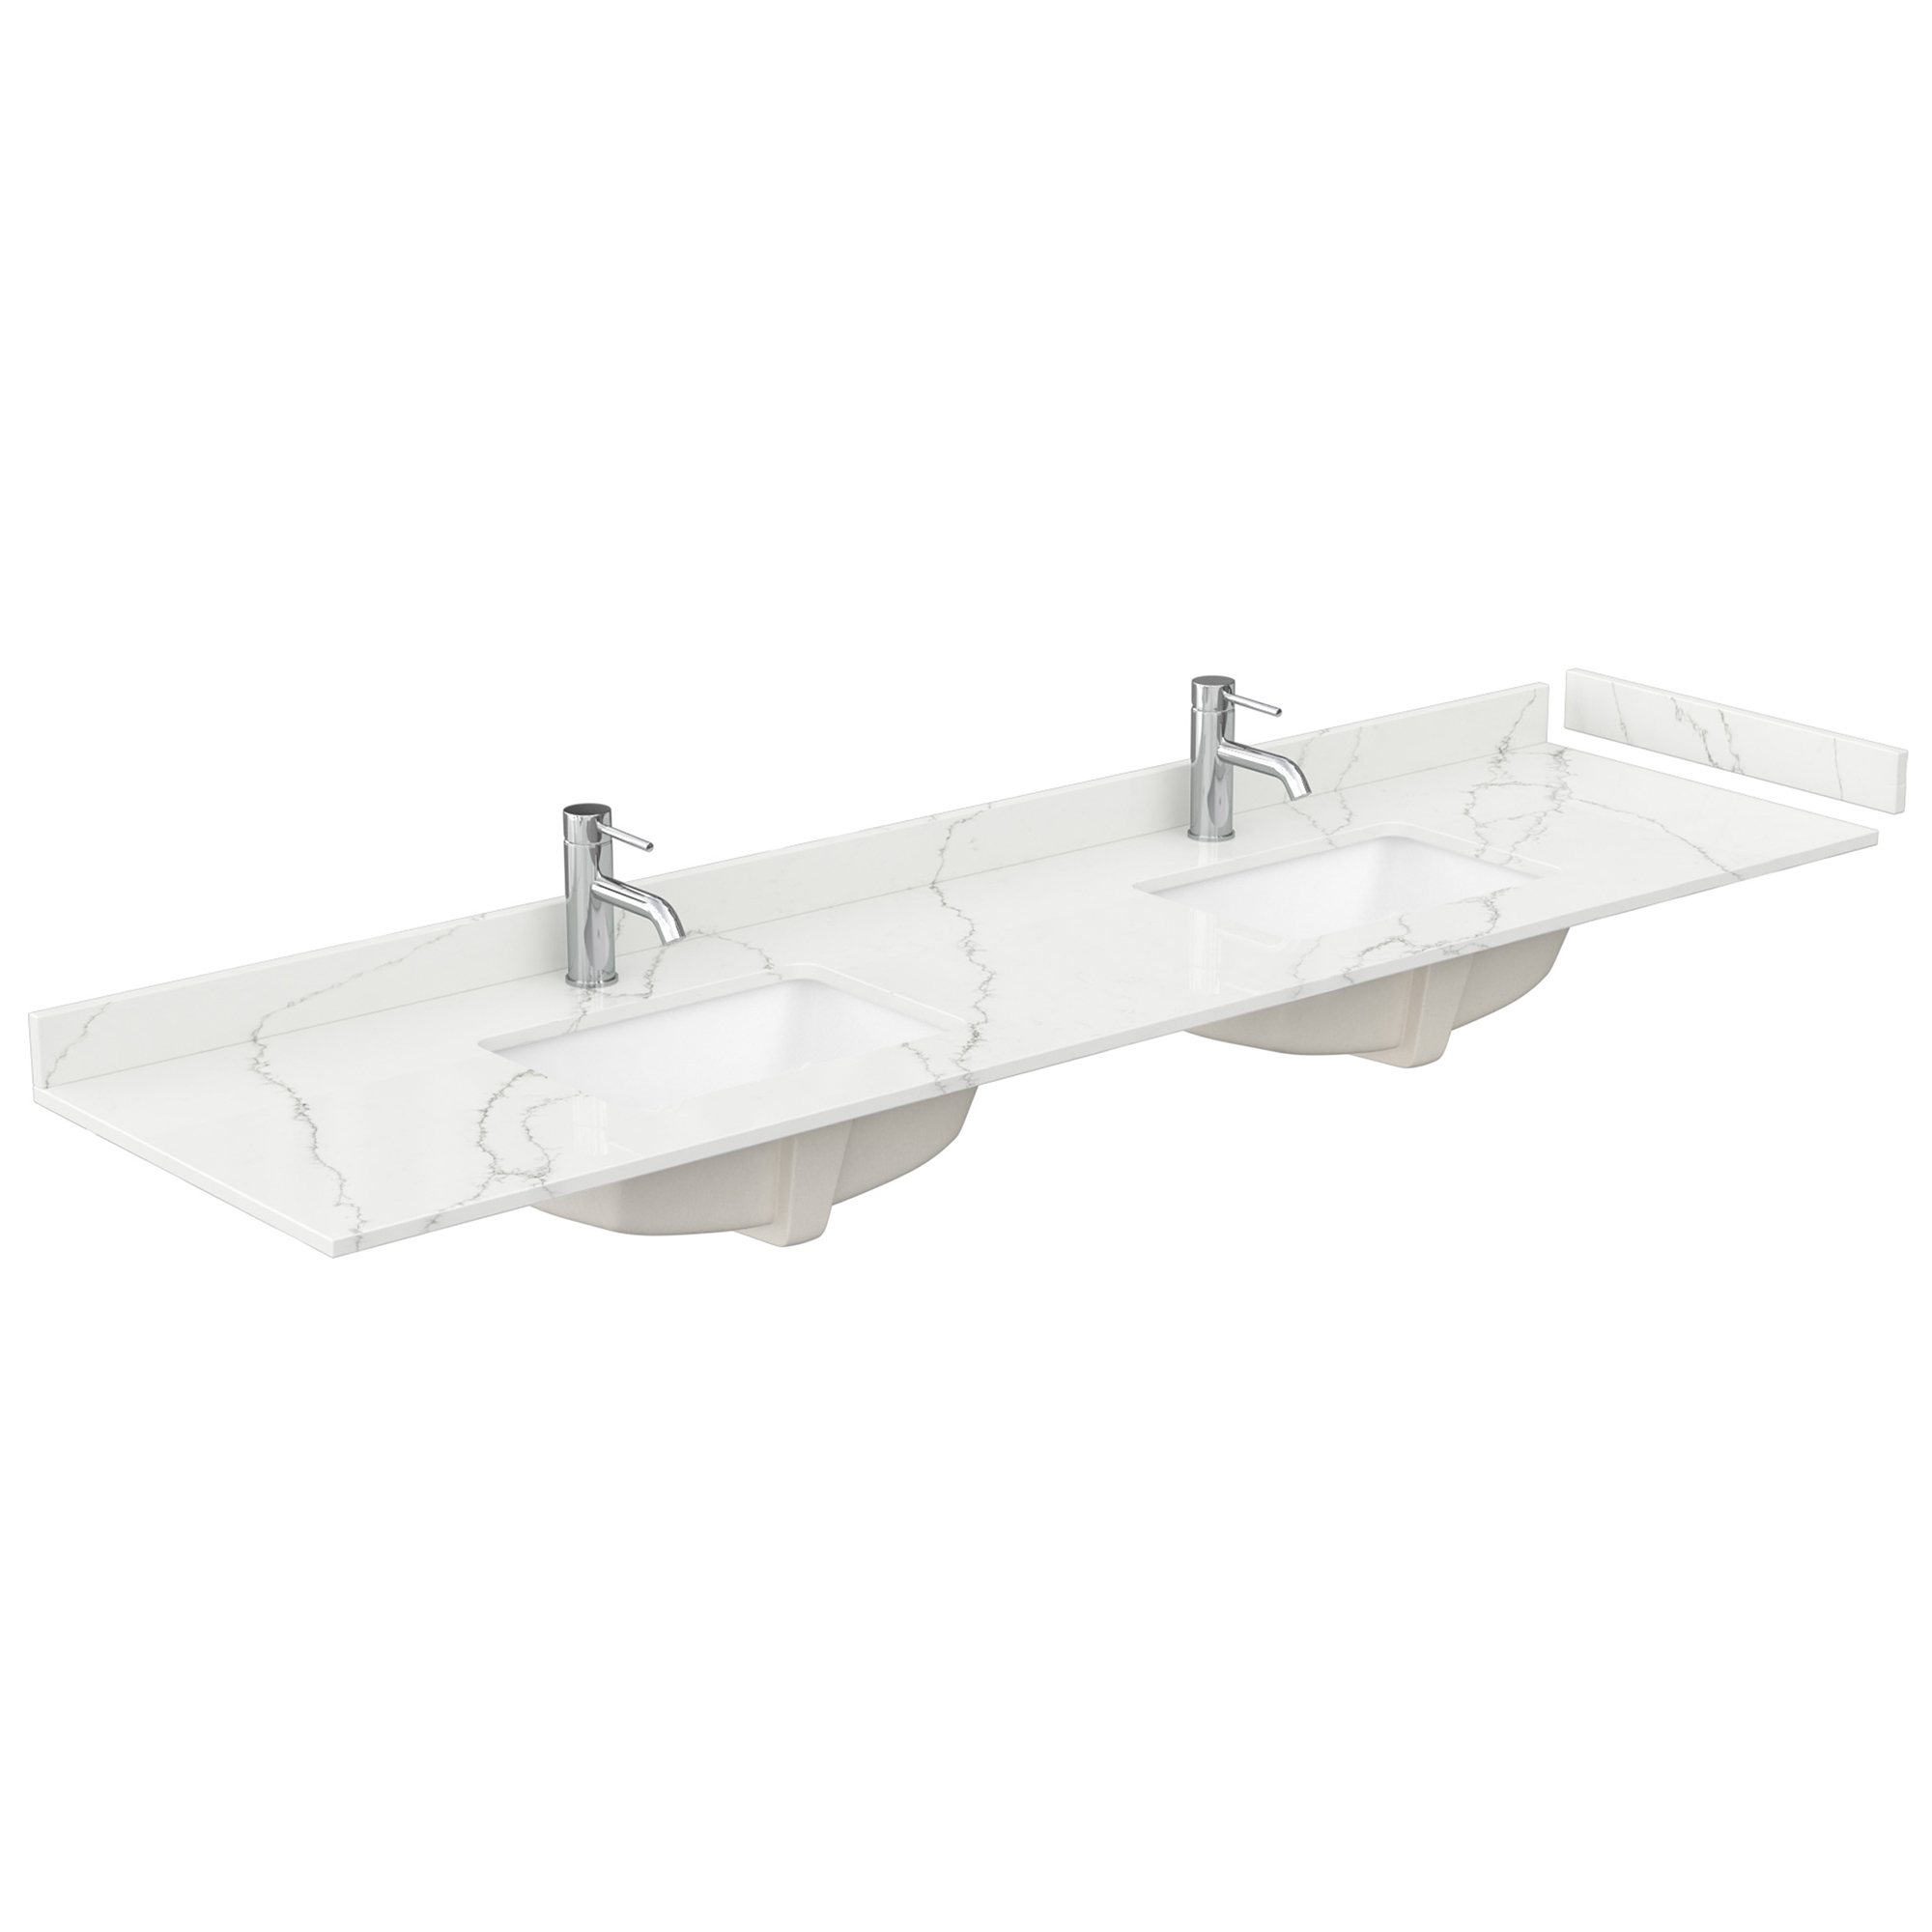 84" Double Countertop - Giotto Quartz (8066) with Undermount Square Sinks (1-Hole) - Includes Backsplash and Sidesplash WCFQC184DTOPUNSGT